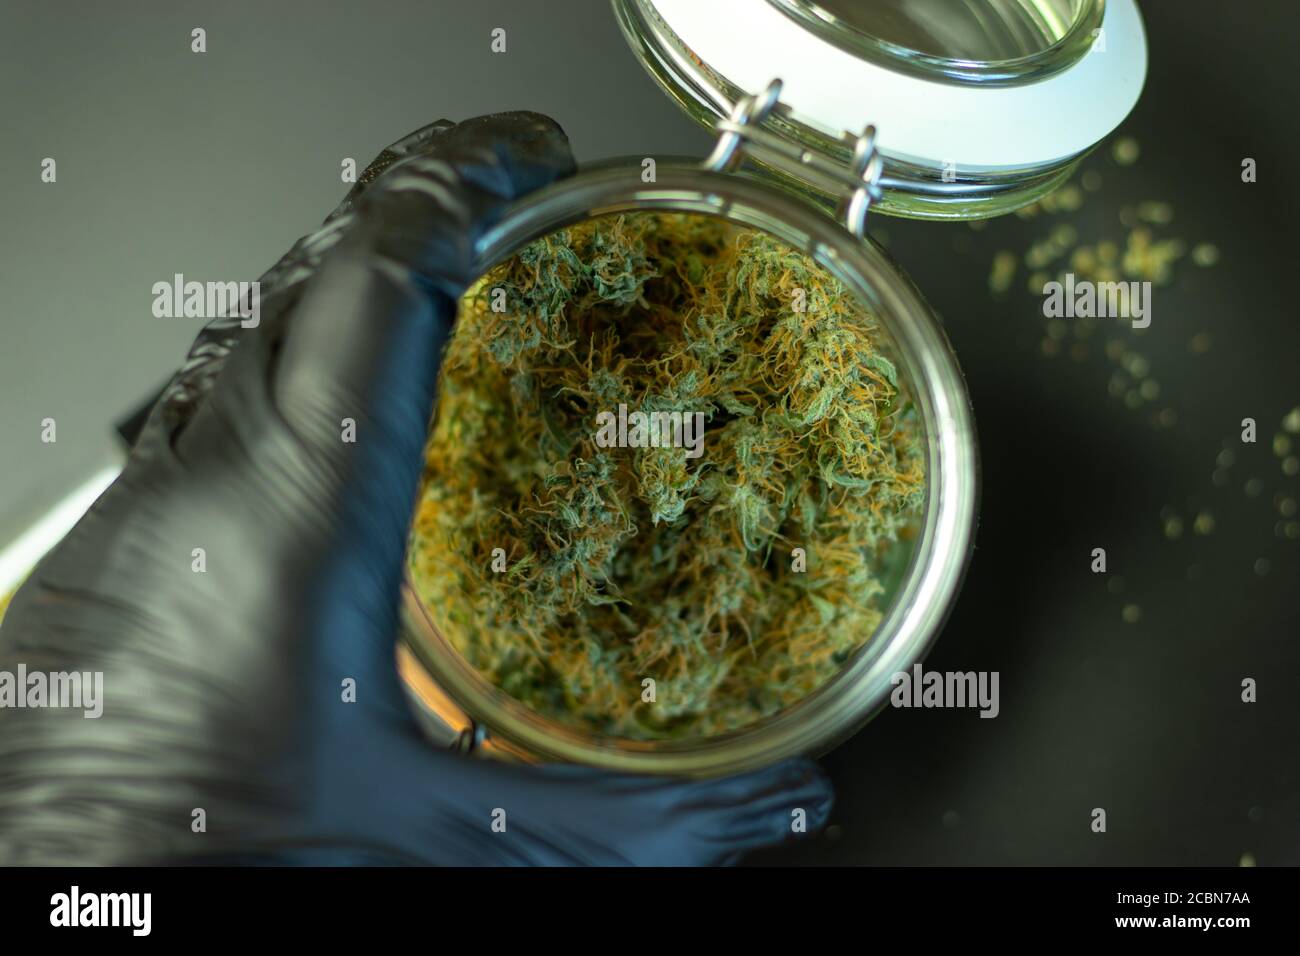 Big container of cannabis jar top view. Man touching weed buds. Marijuana business industry Stock Photo